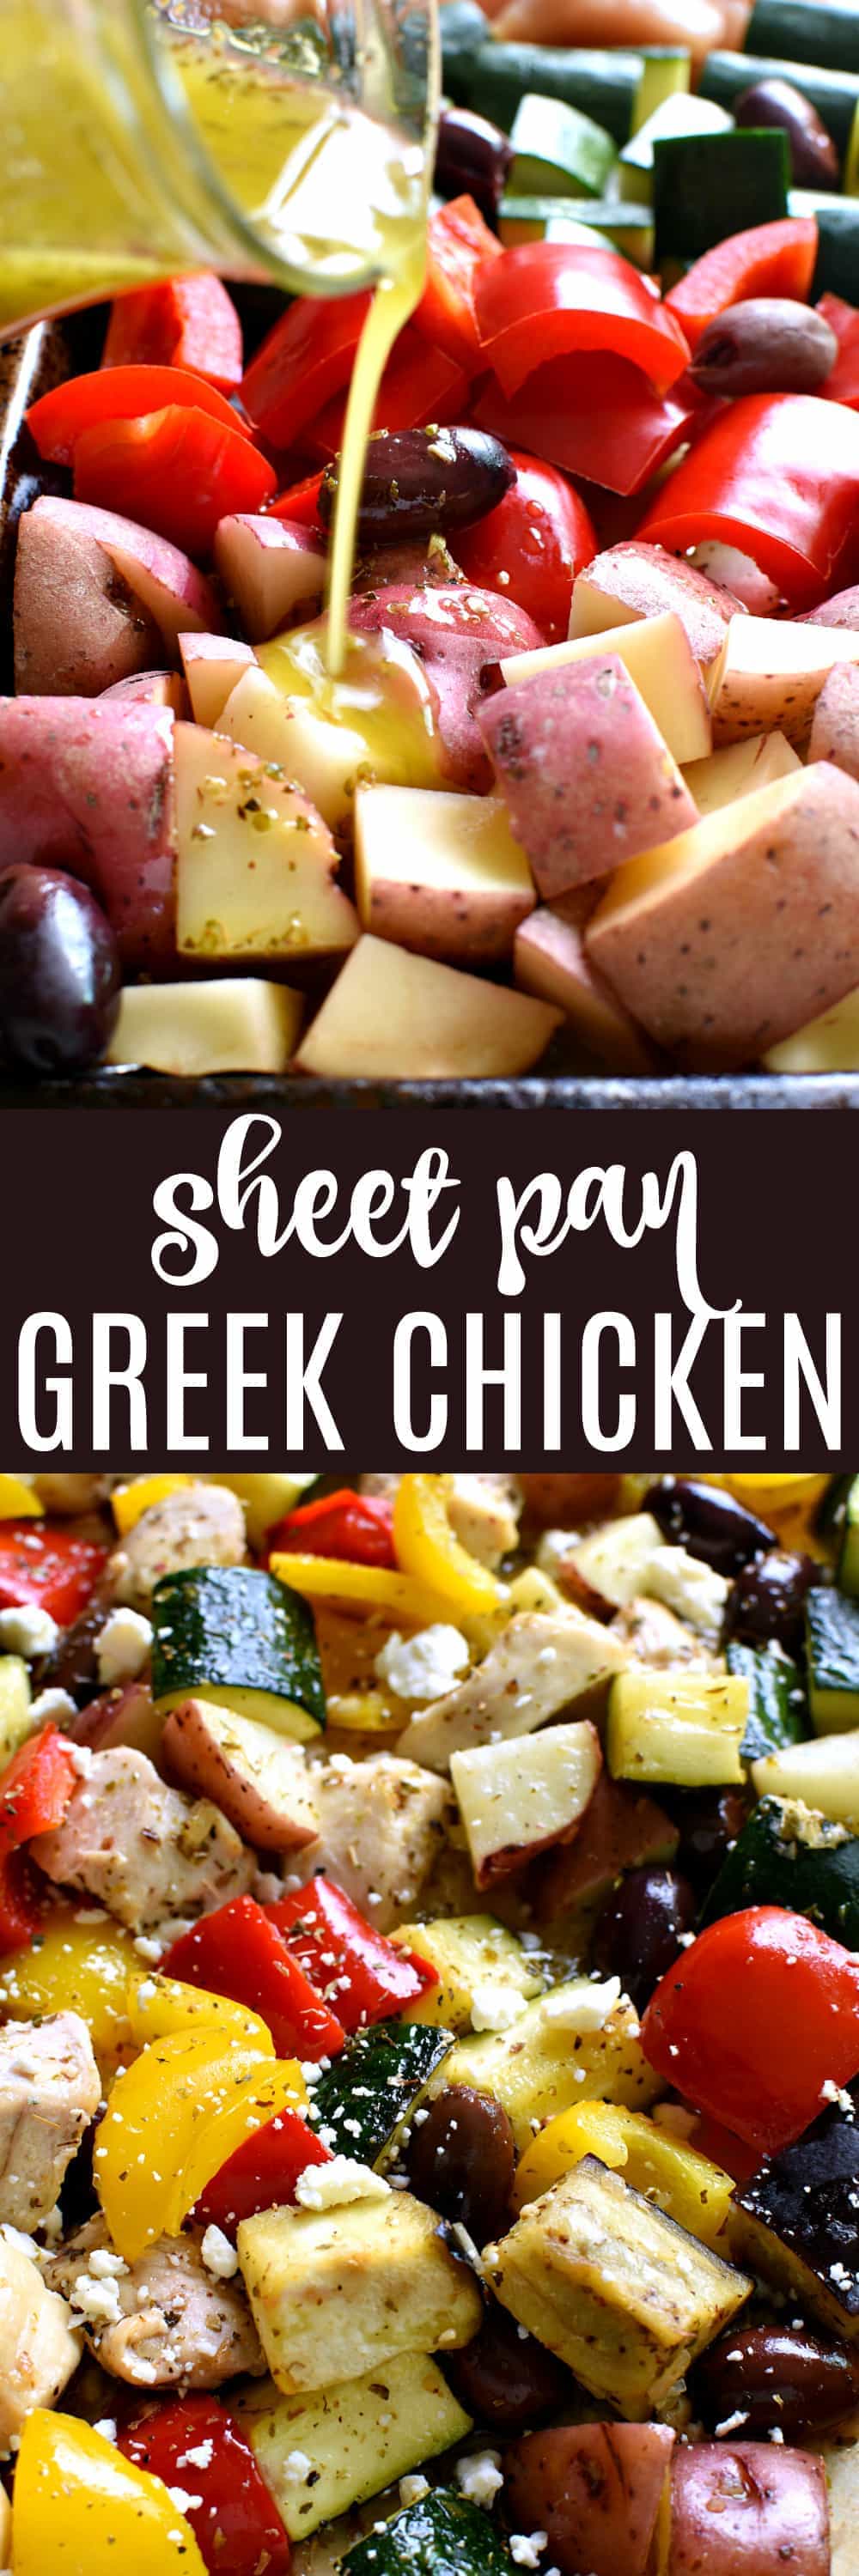 This Sheet Pan Greek Chicken has ALL the best flavors! Loaded with chicken, veggies, kalamata olives, and Greek seasonings, this delicious one pan dinner comes together quickly and feeds a family!